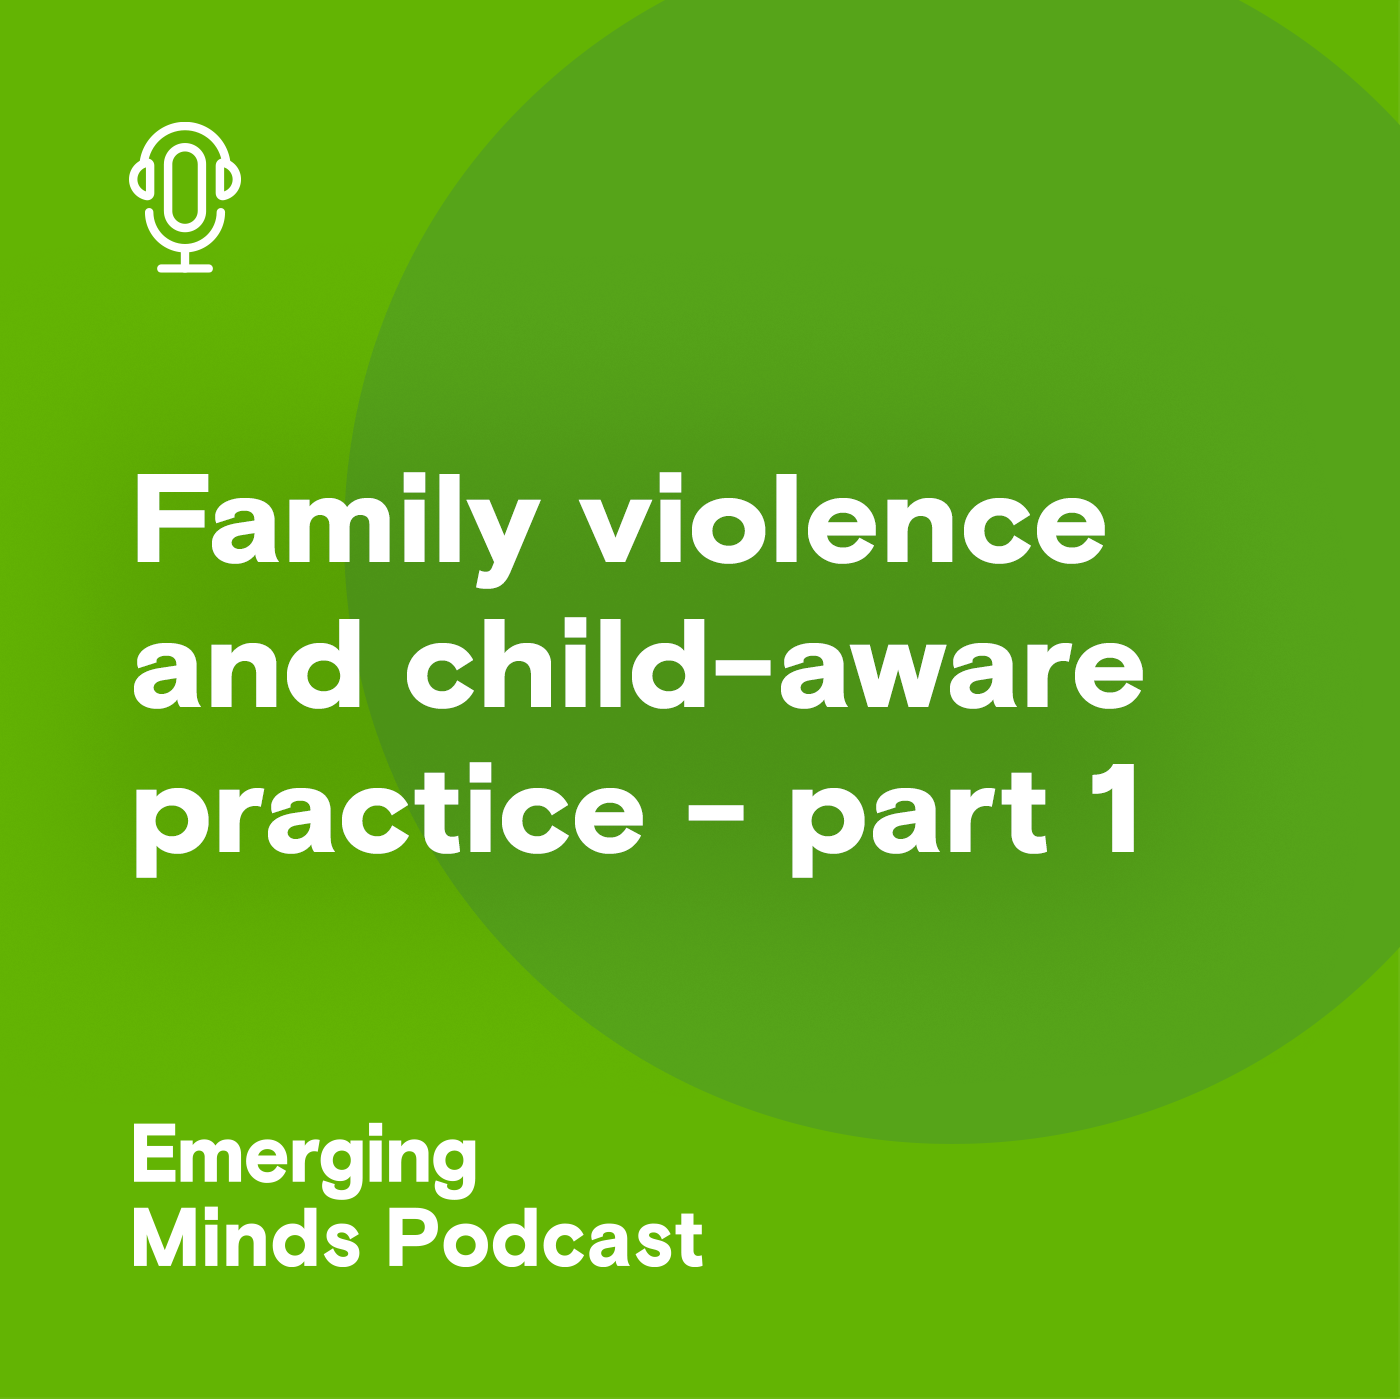 Family violence and child-aware practice - part one